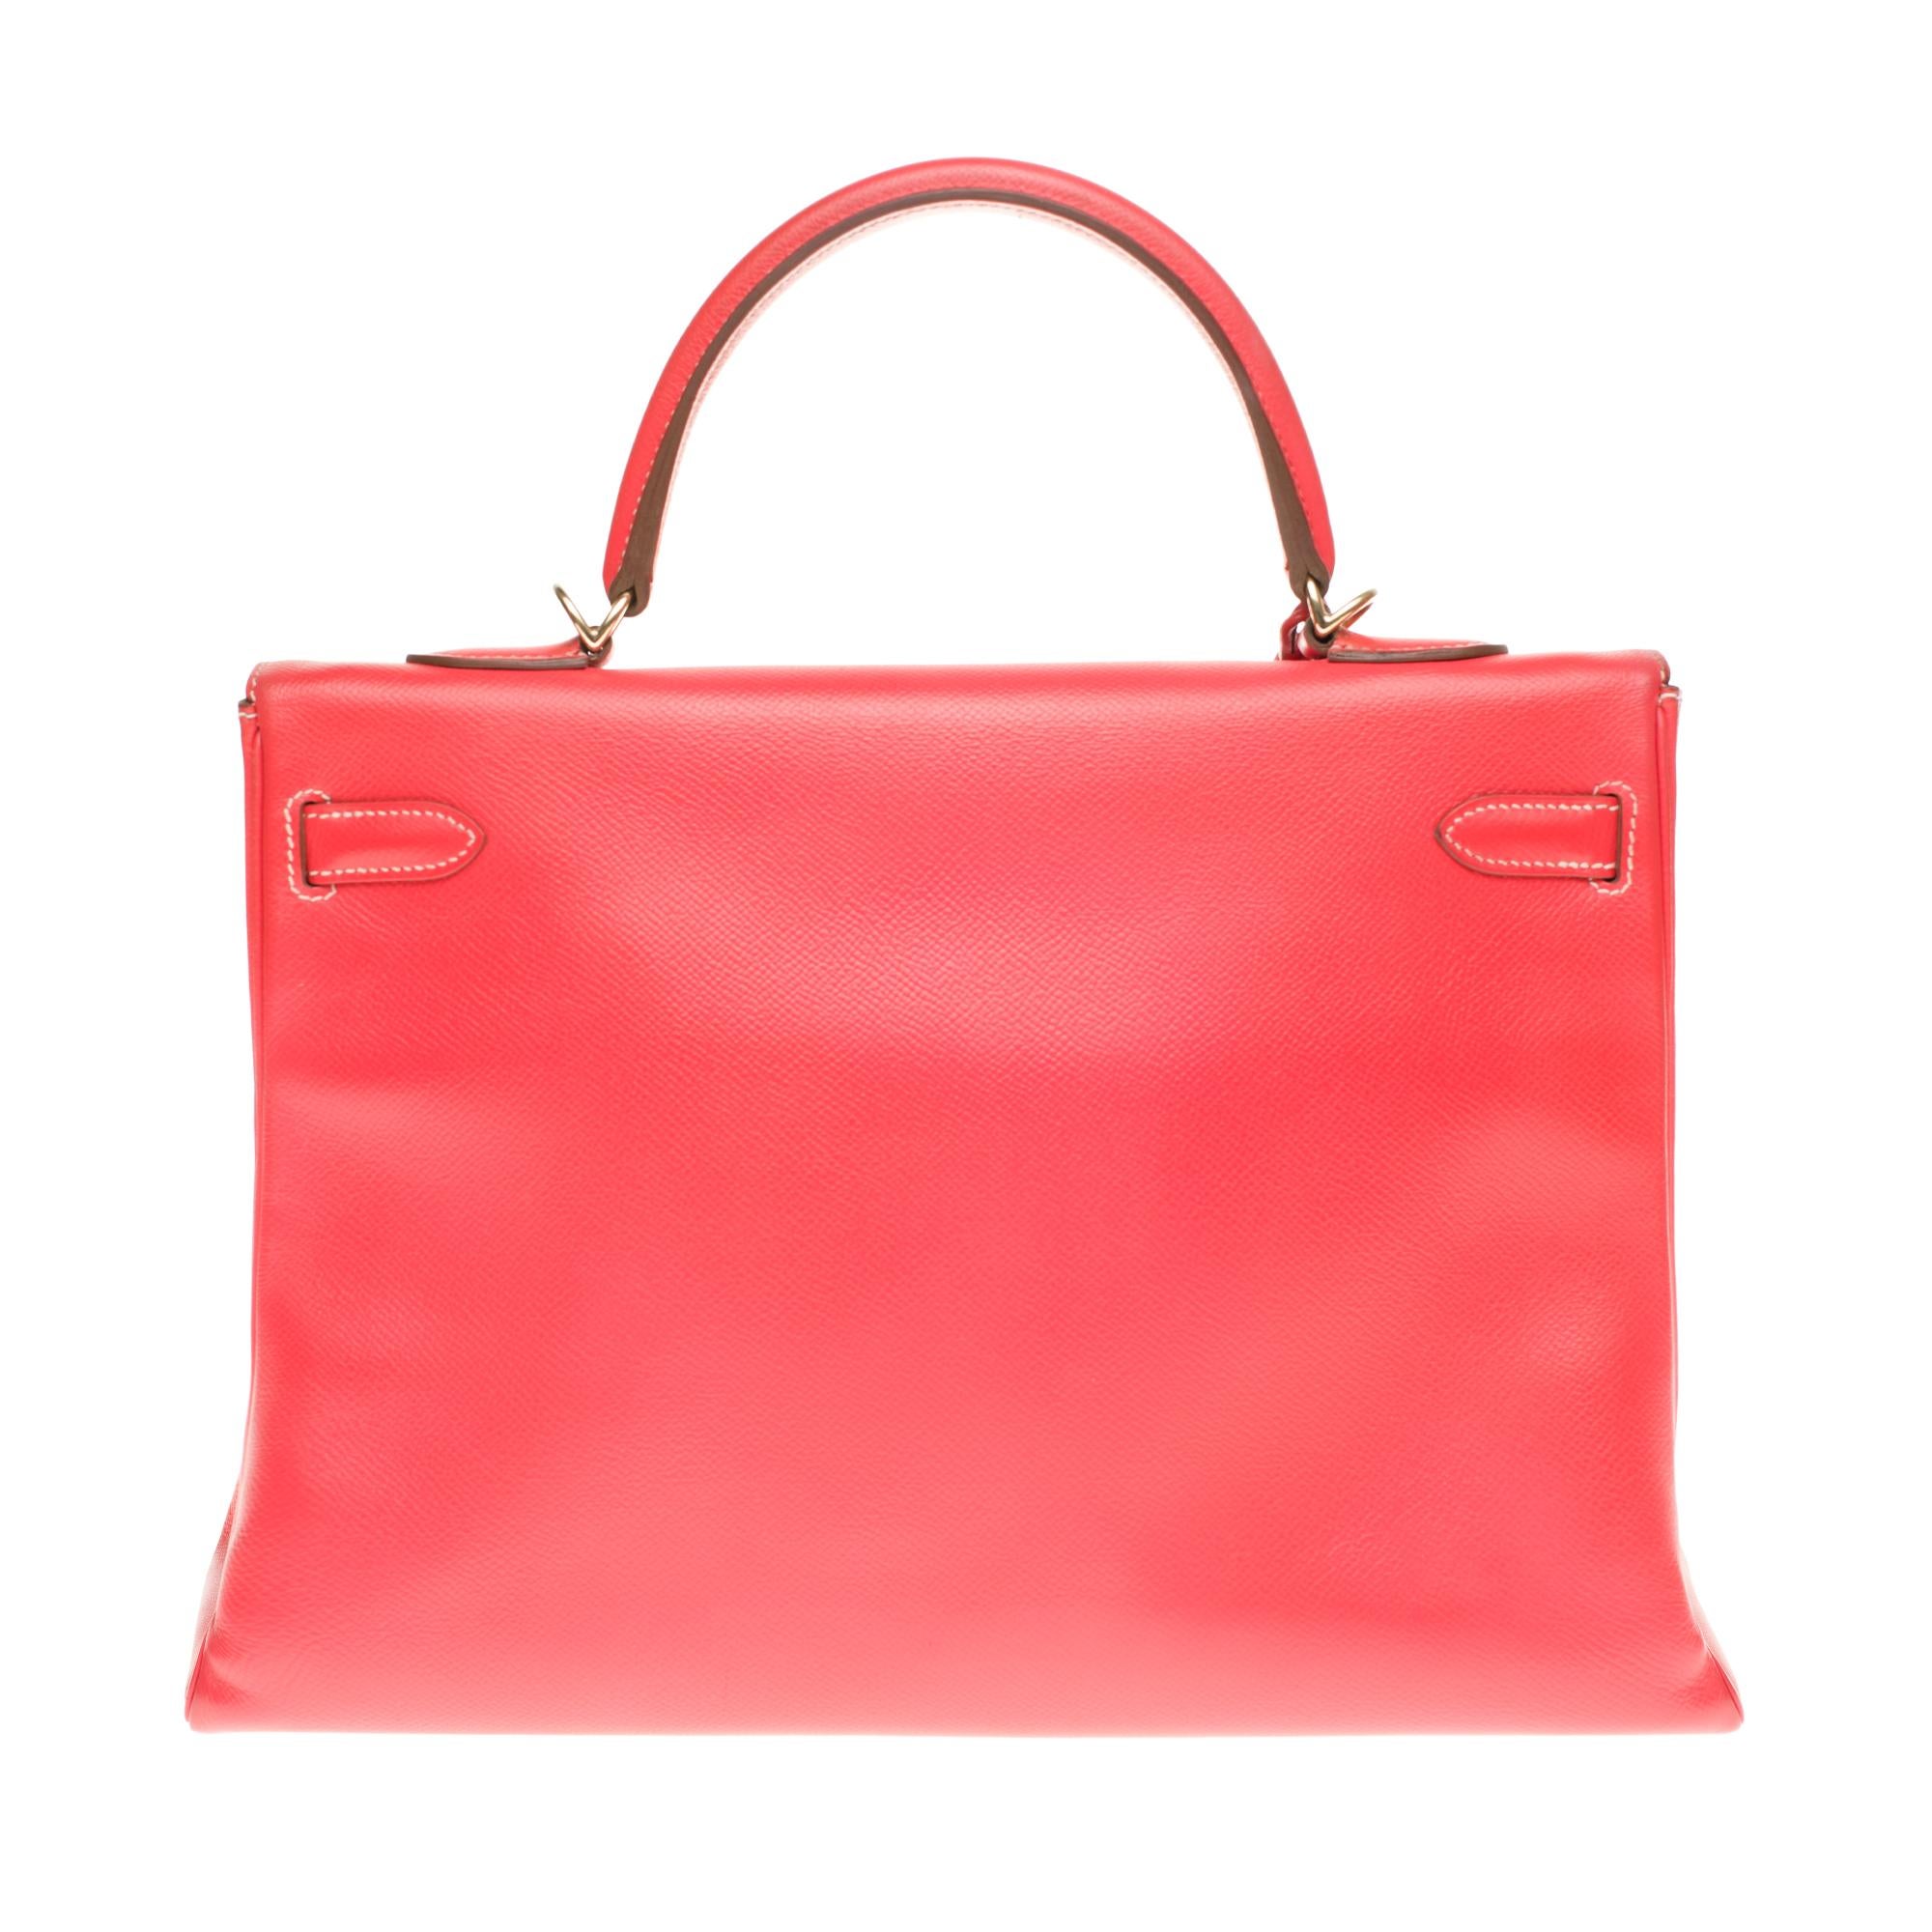 A limited-edition Hermès Kelly 35 Candy Collection made from Epsom leather featured in Rose Jaipur and Gold with visible signs of wear. Rose Jaipur is the name of the Indian city of Jaipur, also known as the “Pink City”,  where all buildings are